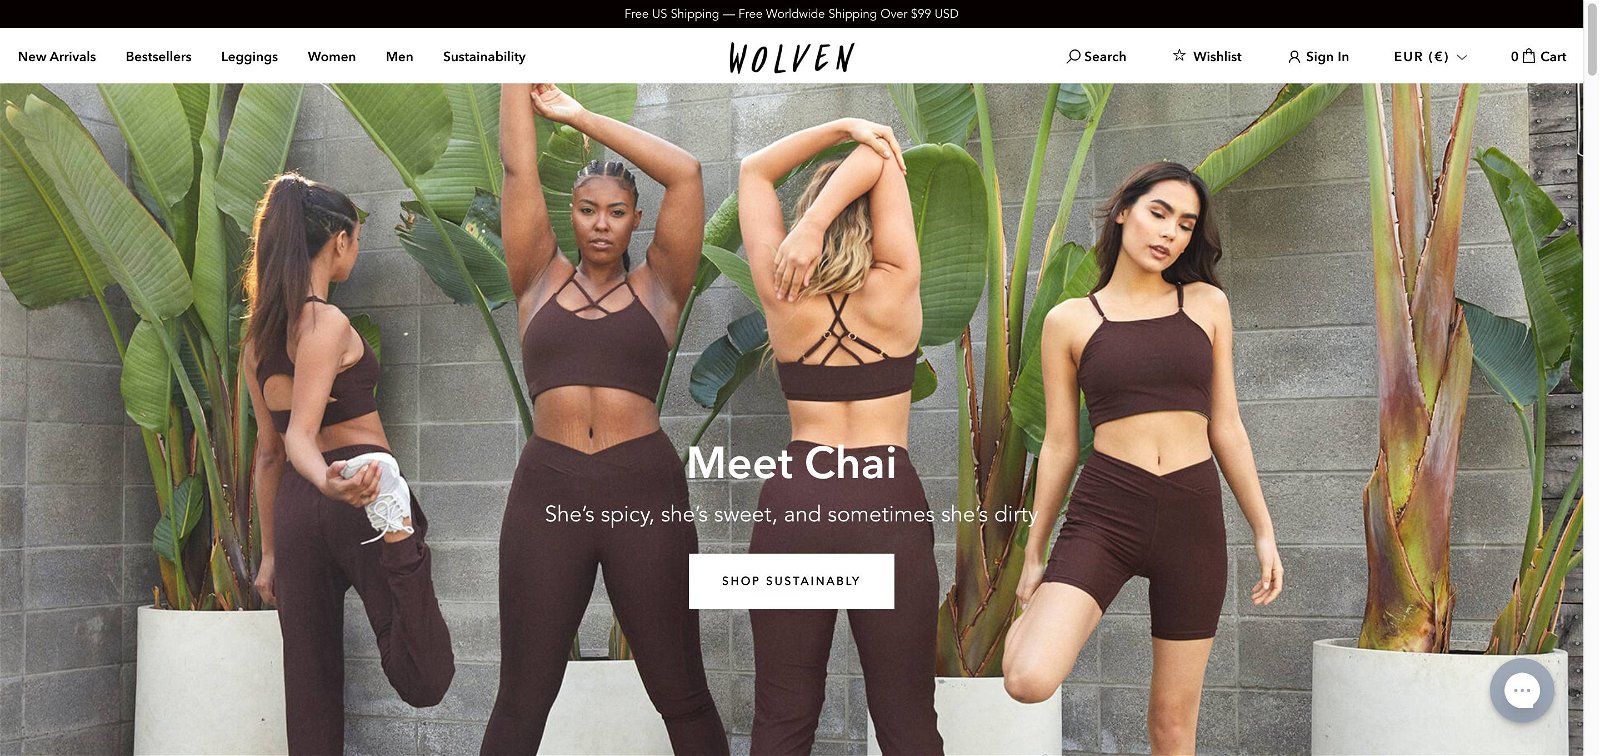 Wolven threads.com